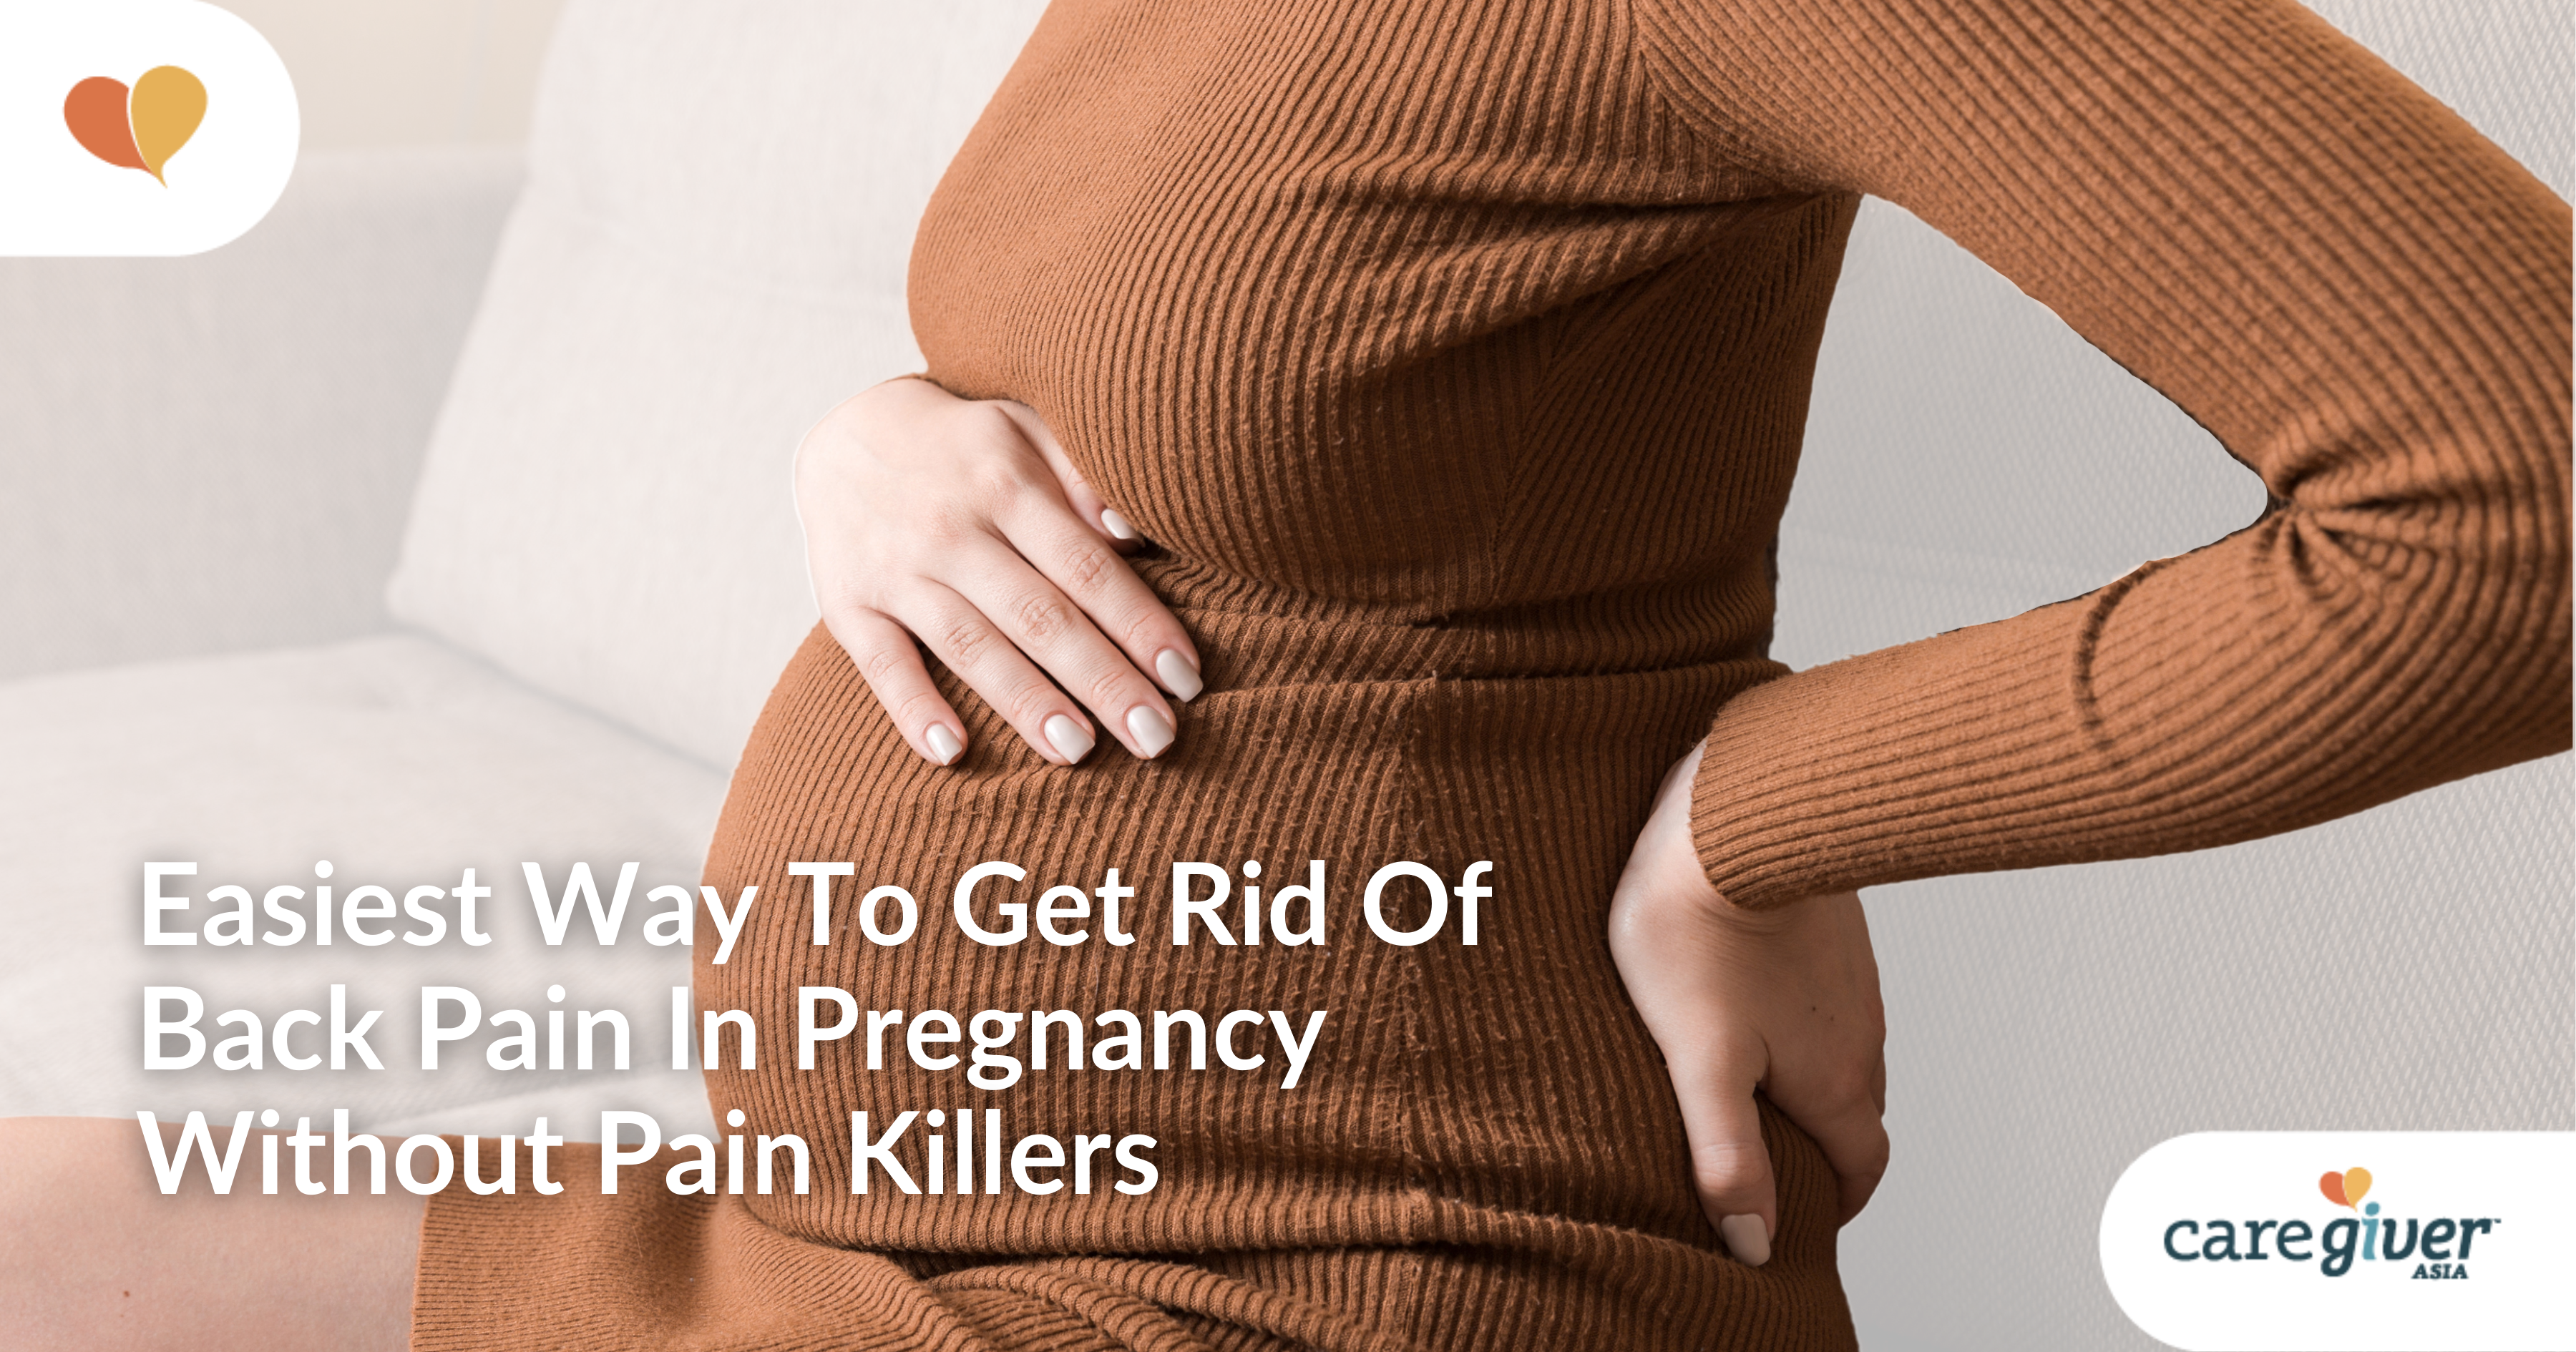 5 simple tips to relieve lower back pain in pregnancy • Mother